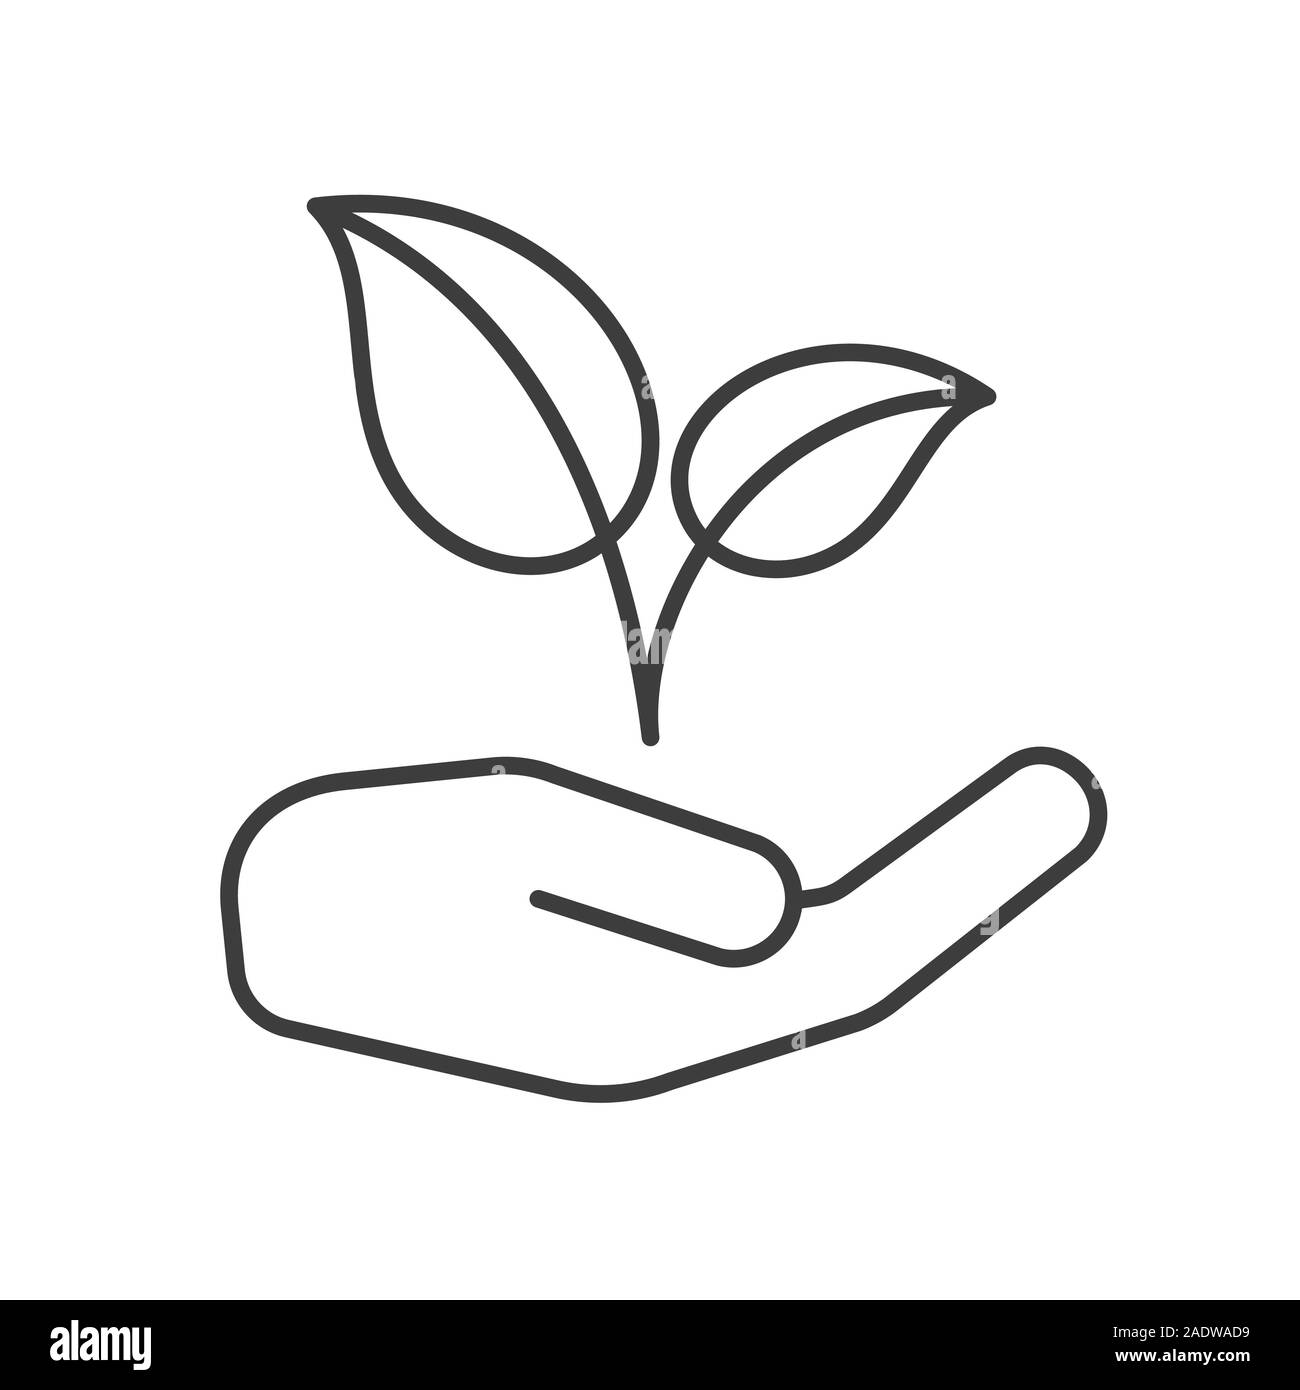 https://c8.alamy.com/comp/2ADWAD9/eco-care-linear-icon-ecology-protection-thin-line-illustration-human-hand-with-plant-contour-symbol-vector-isolated-outline-drawing-2ADWAD9.jpg